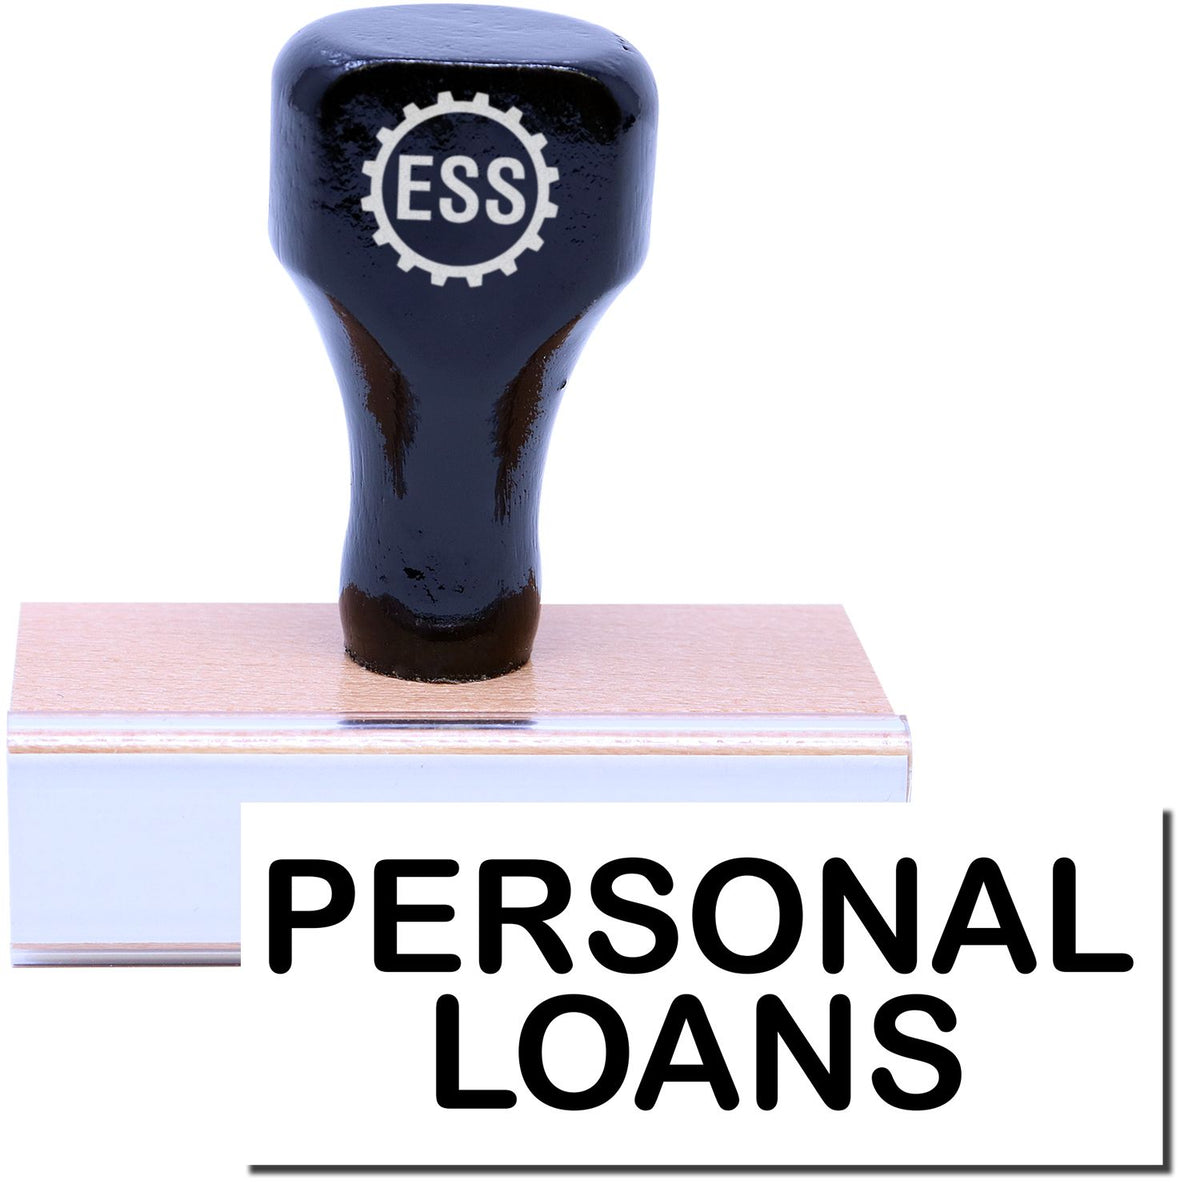 A stock office rubber stamp with a stamped image showing how the text &quot;PERSONAL LOANS&quot; in a large font is displayed after stamping.